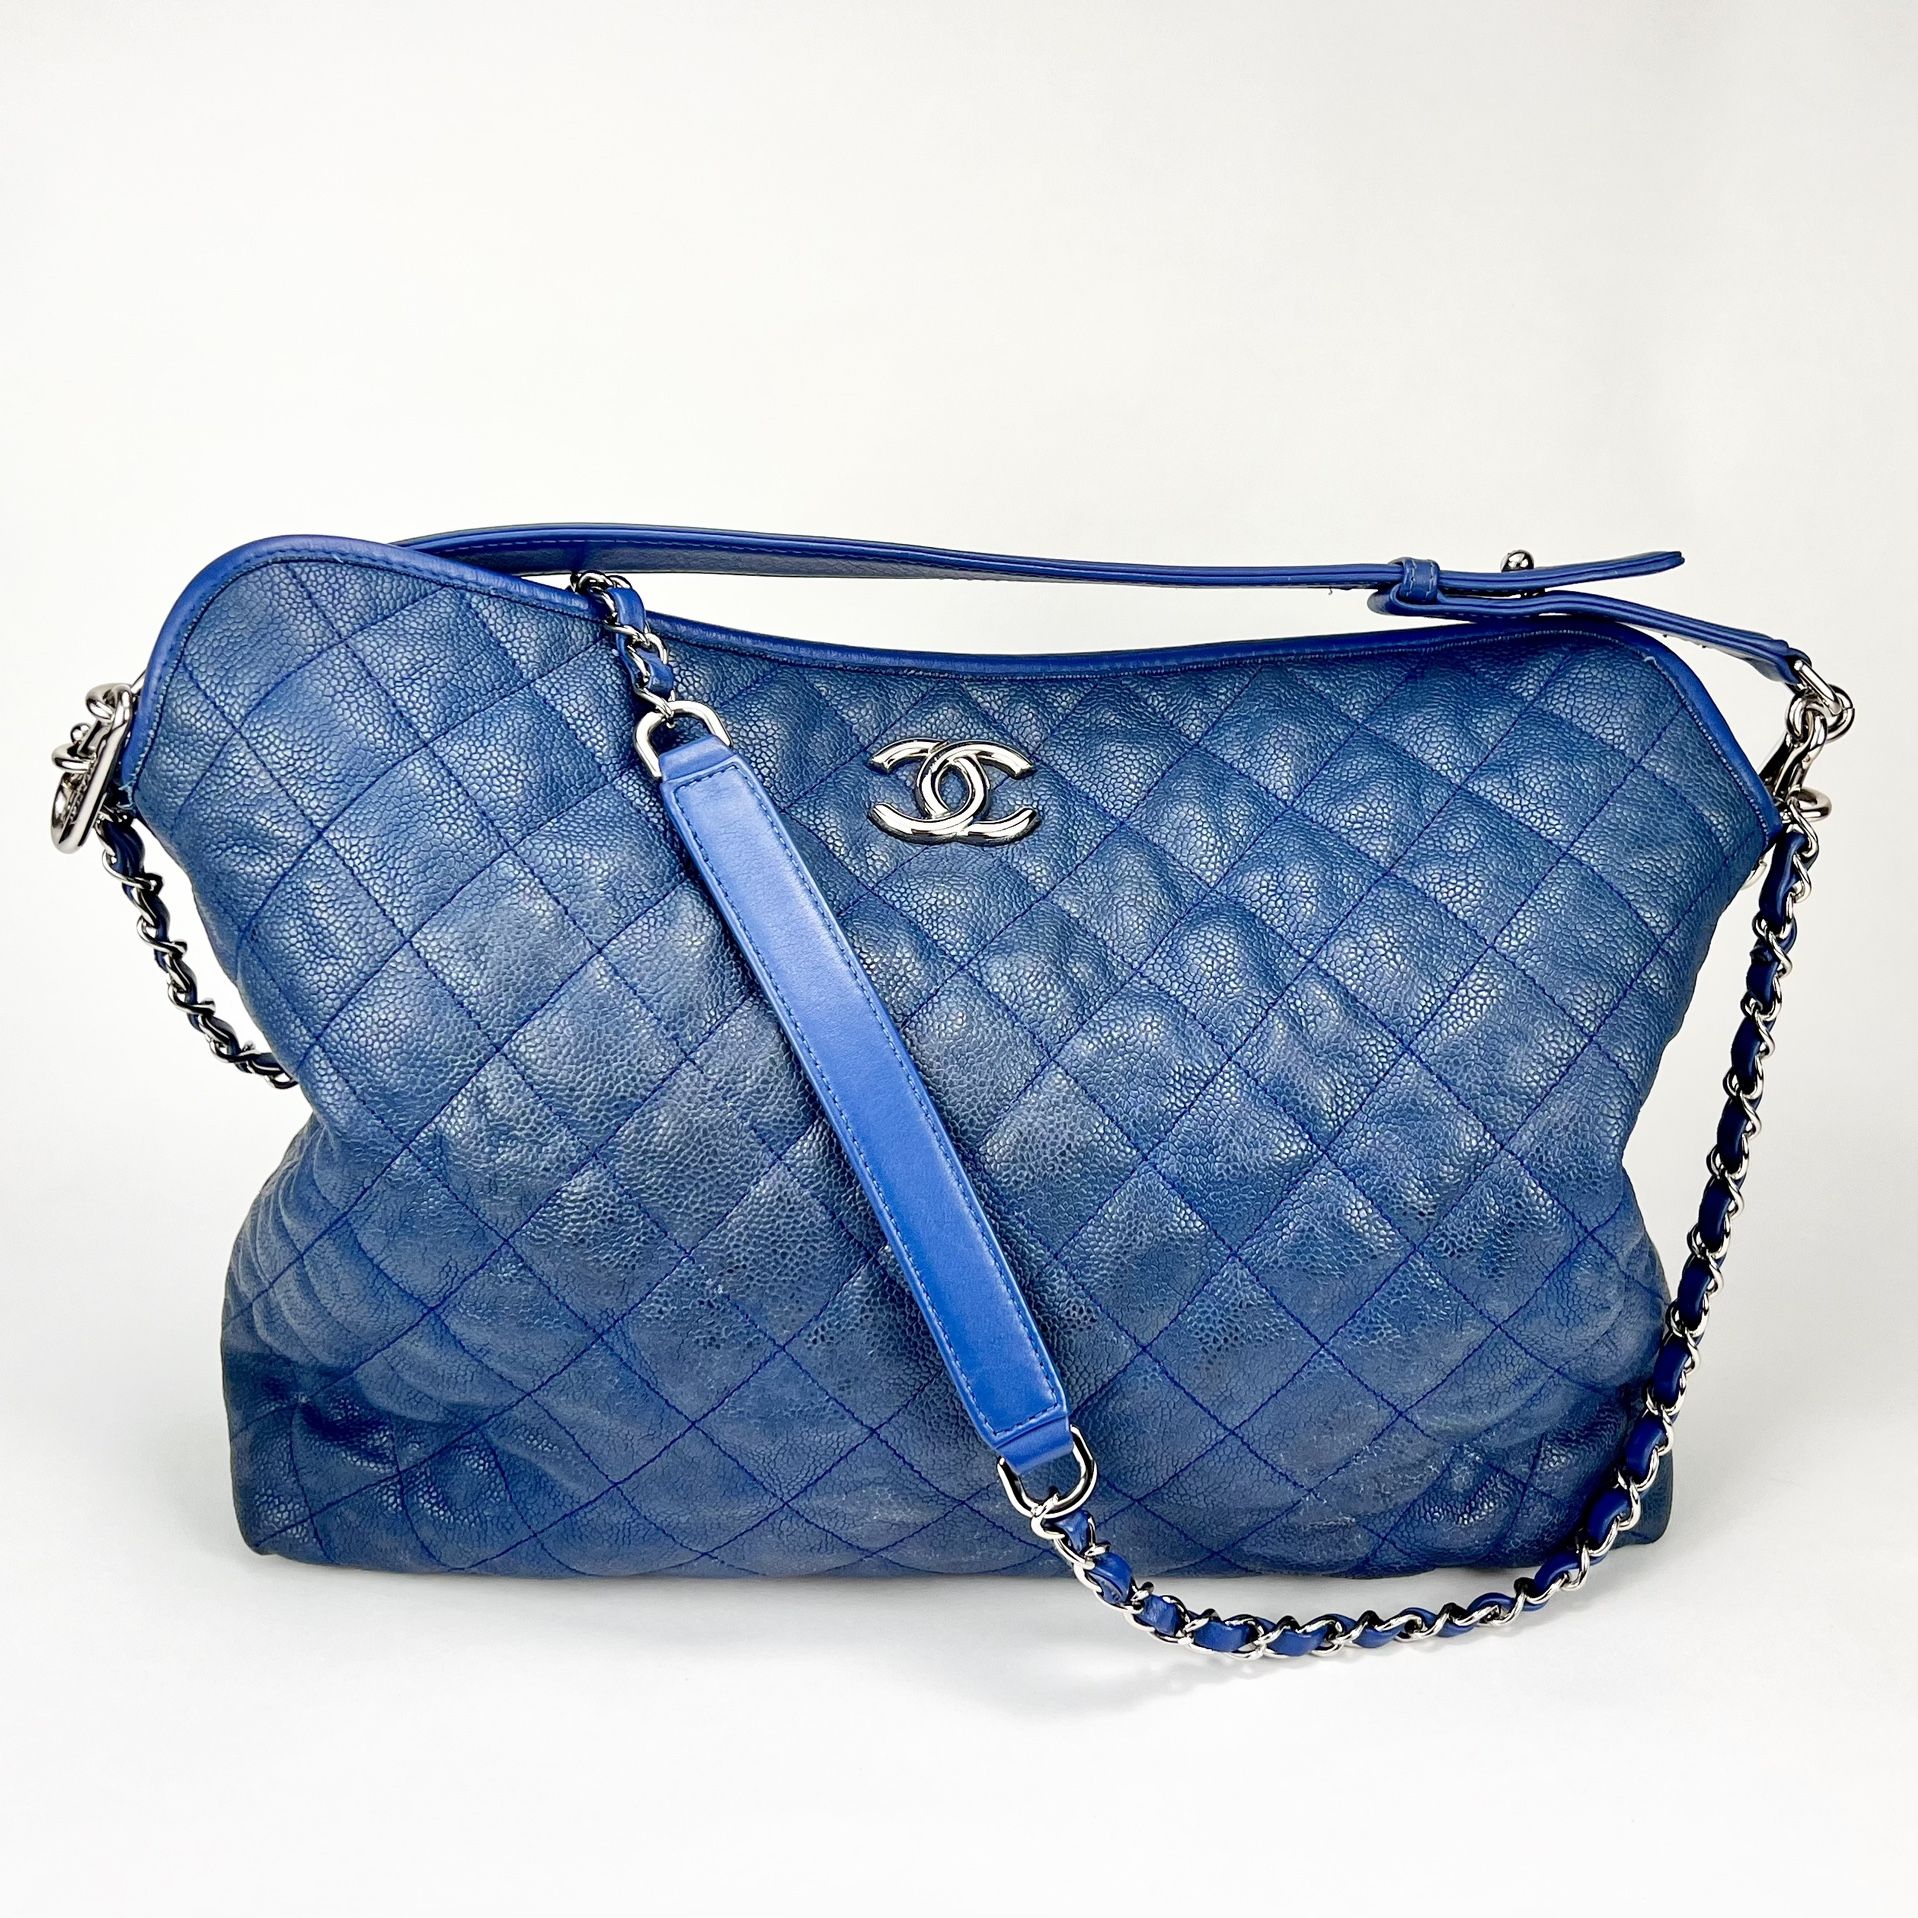 CHANEL Blue French Riviera Quilted Caviar Leather Hobo Shoulder Bag